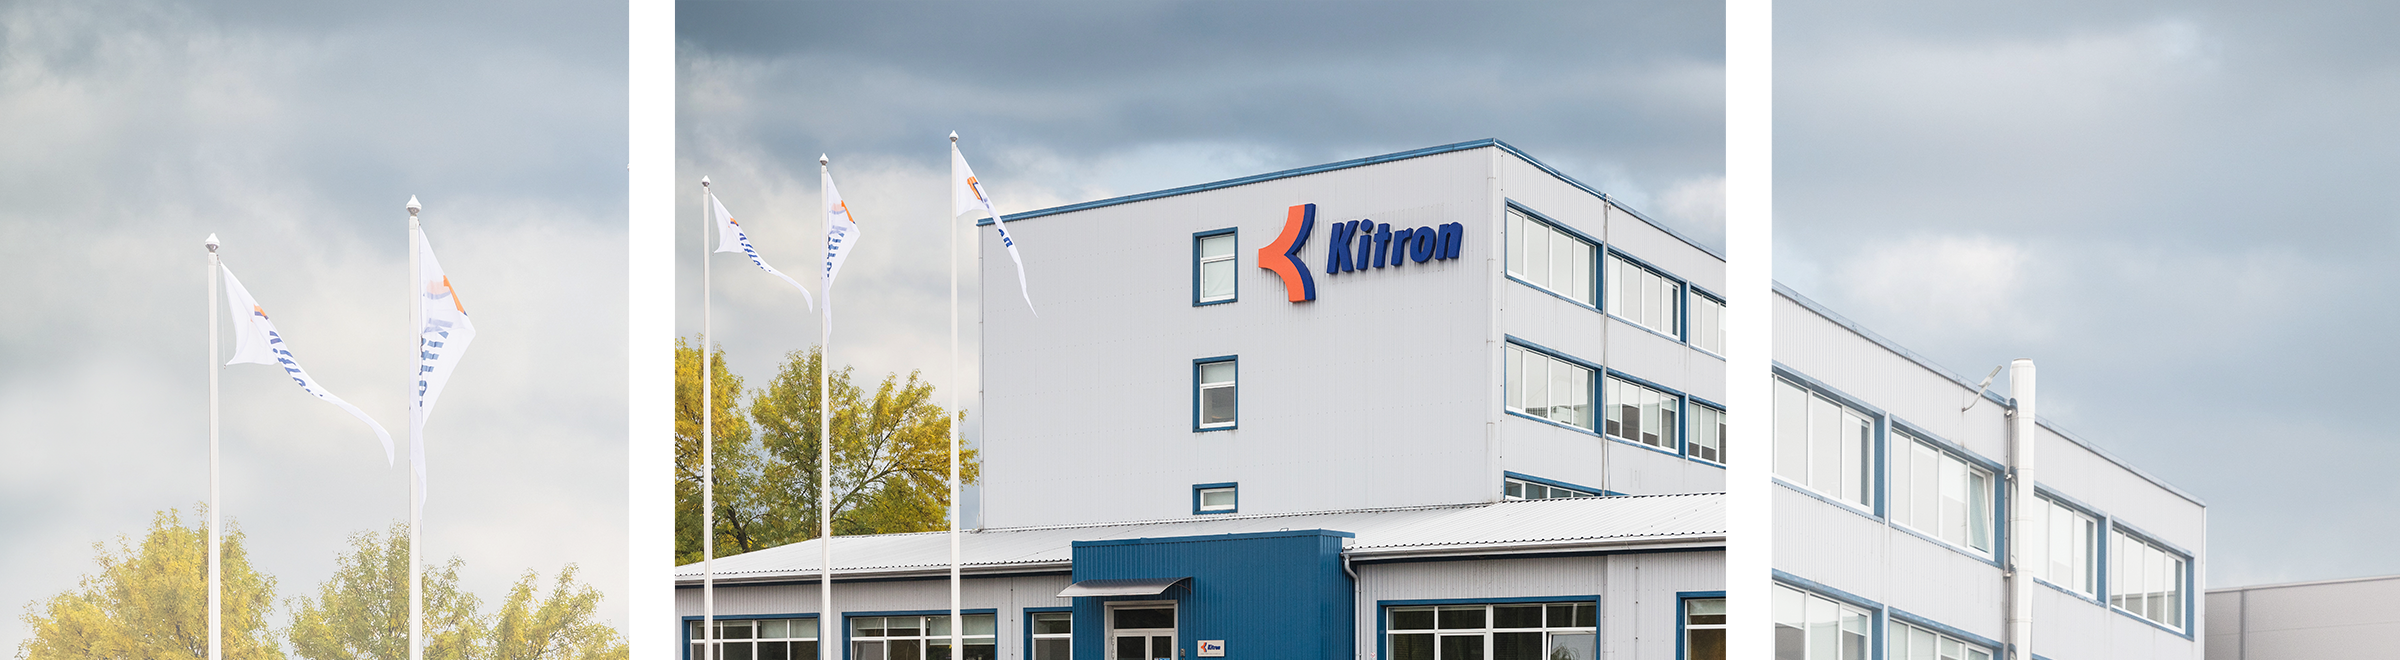 The Journey of Kitron Lithuania Employees: Returning Home after Emigration